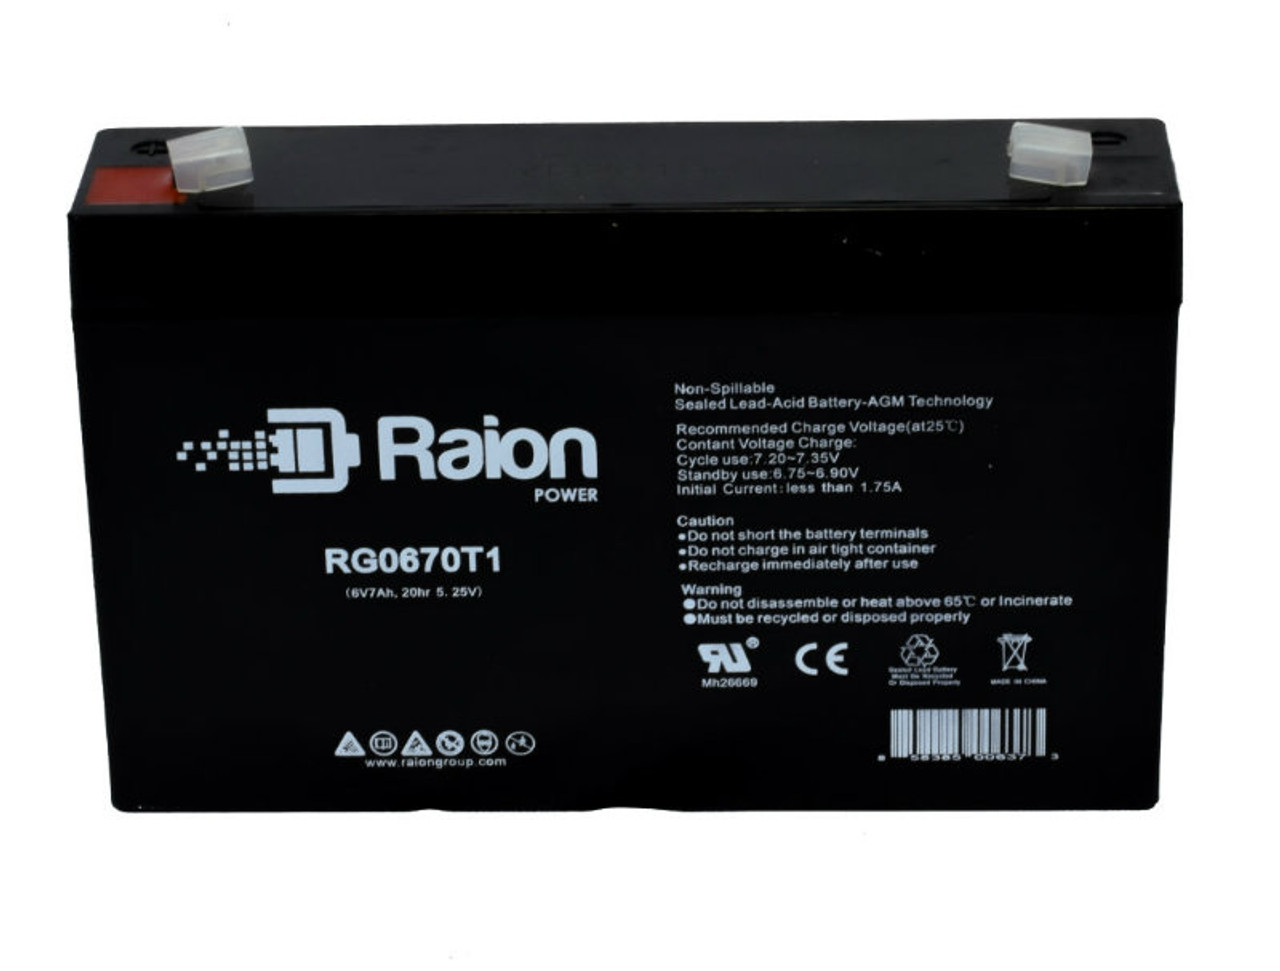 Raion Power RG0670T1 Replacement Battery Cartridge for Light Alarms FL